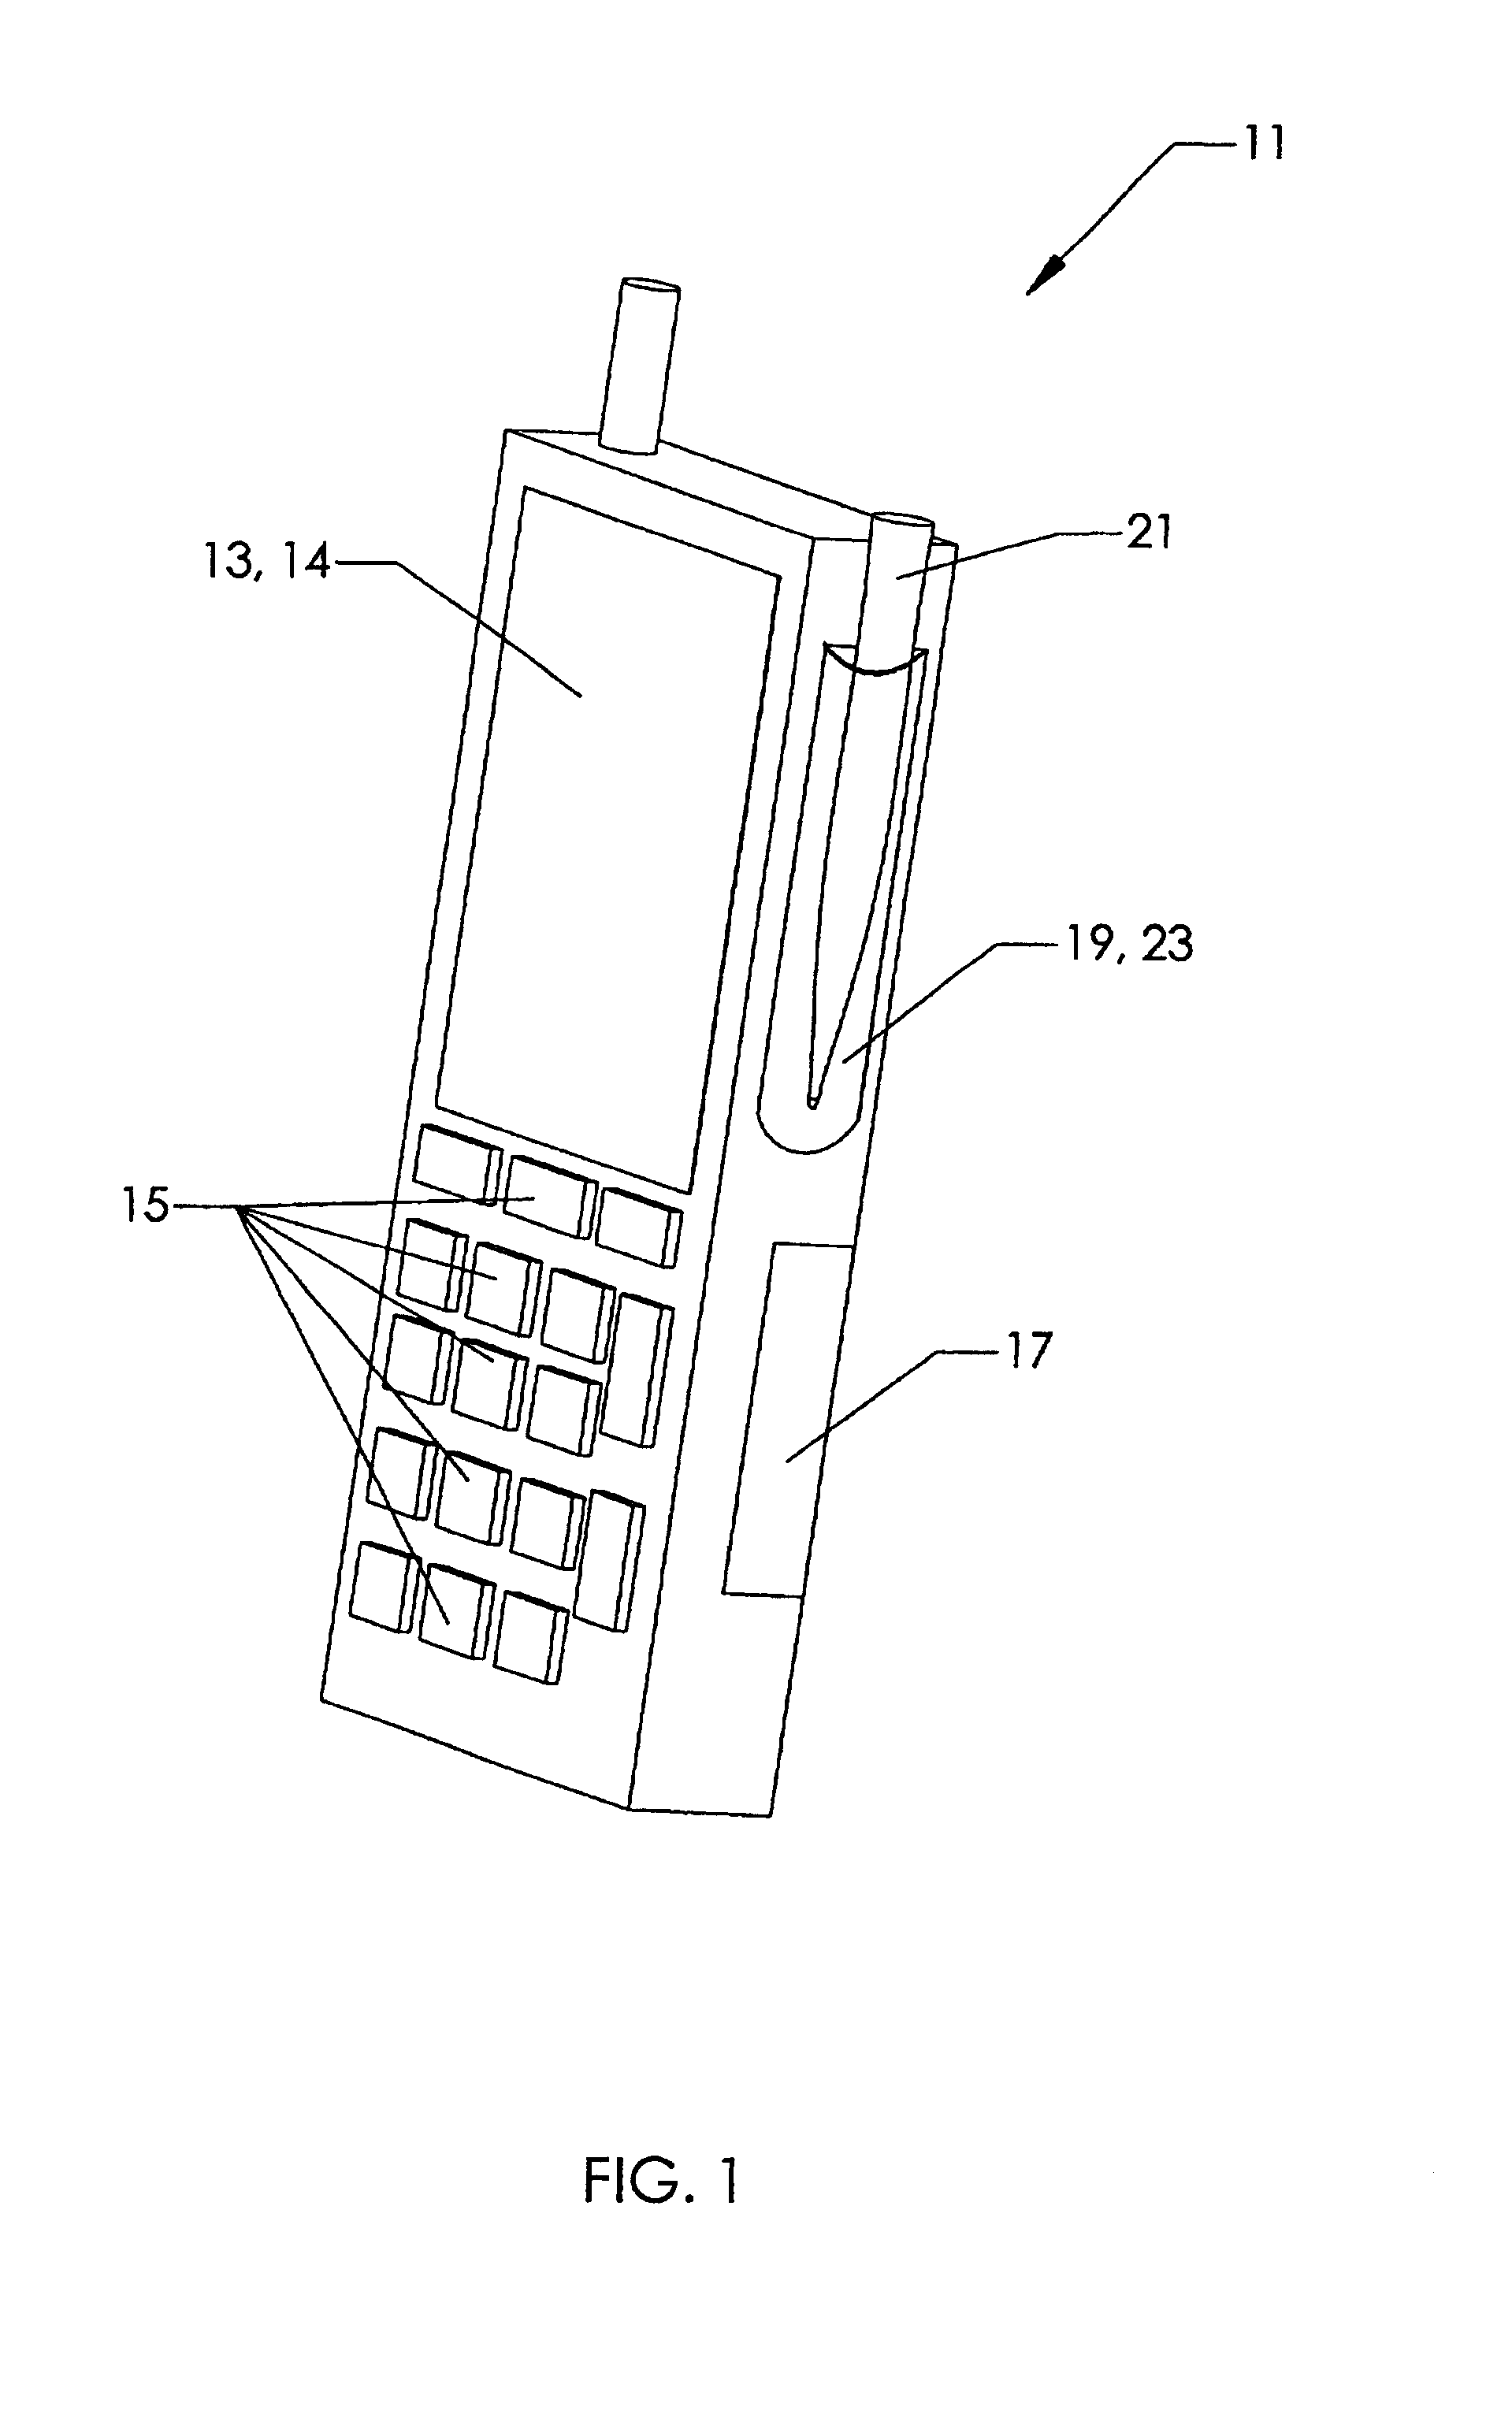 Automatic activation of touch sensitive screen in a hand held computing device